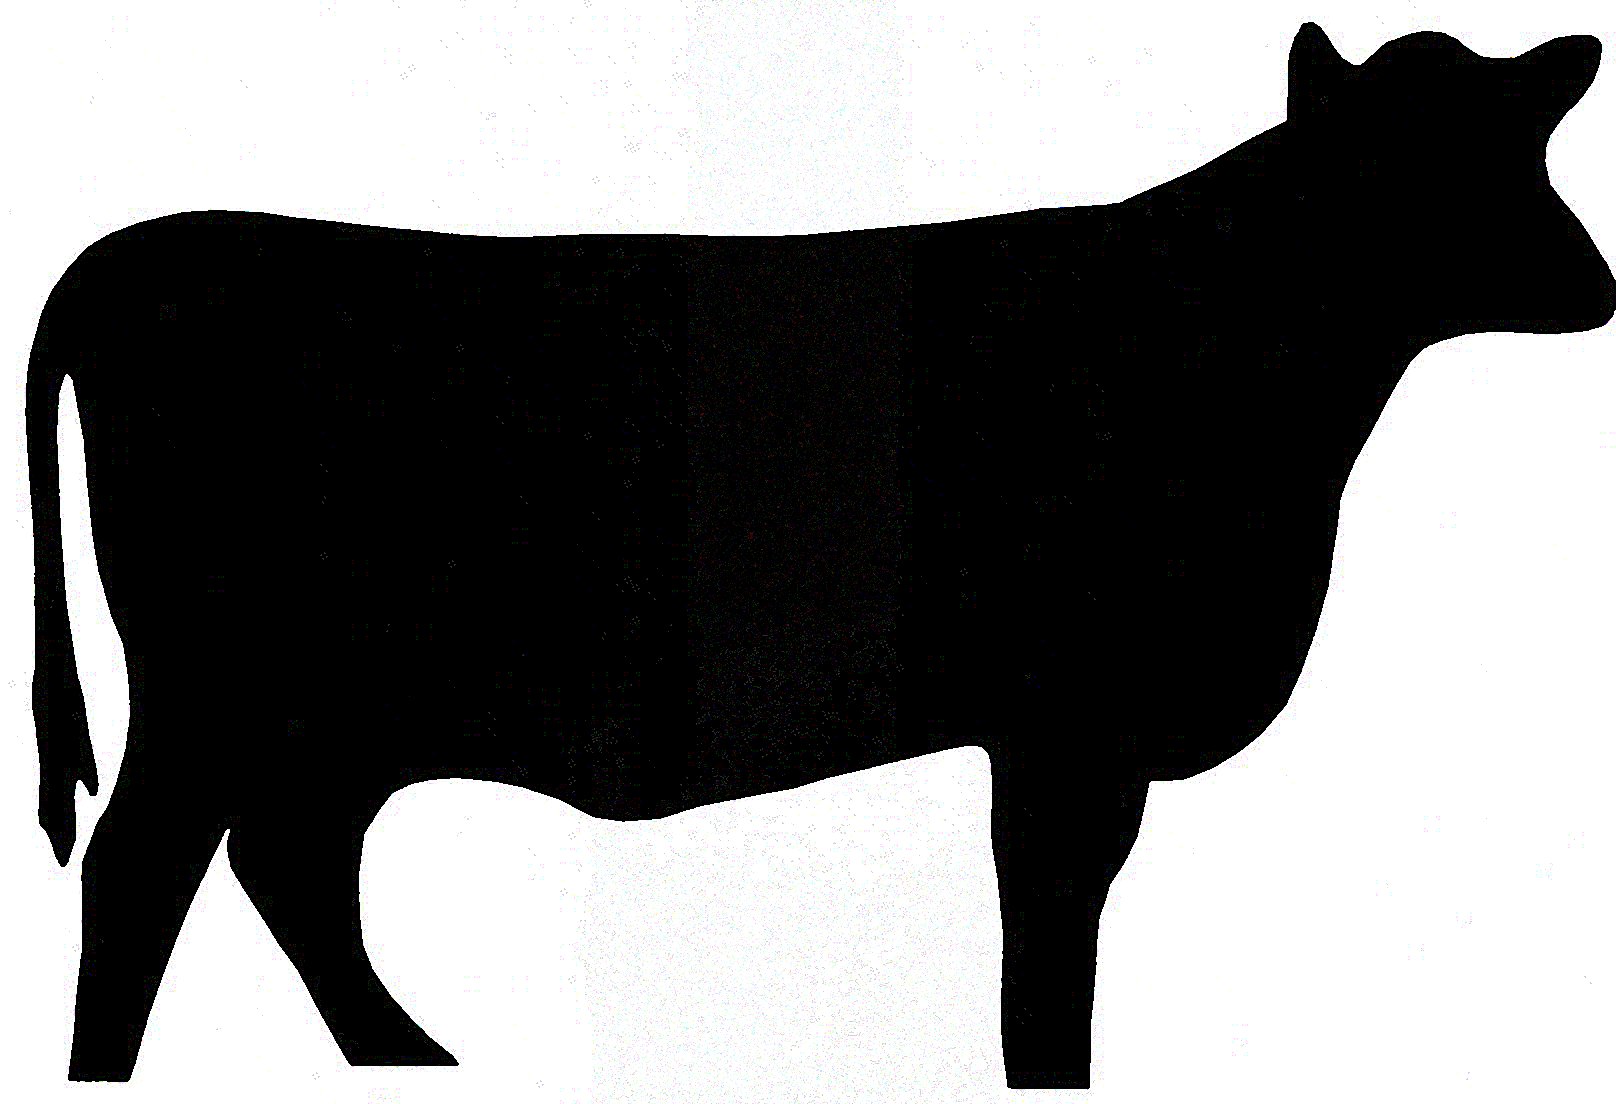 Cow Silhouette 